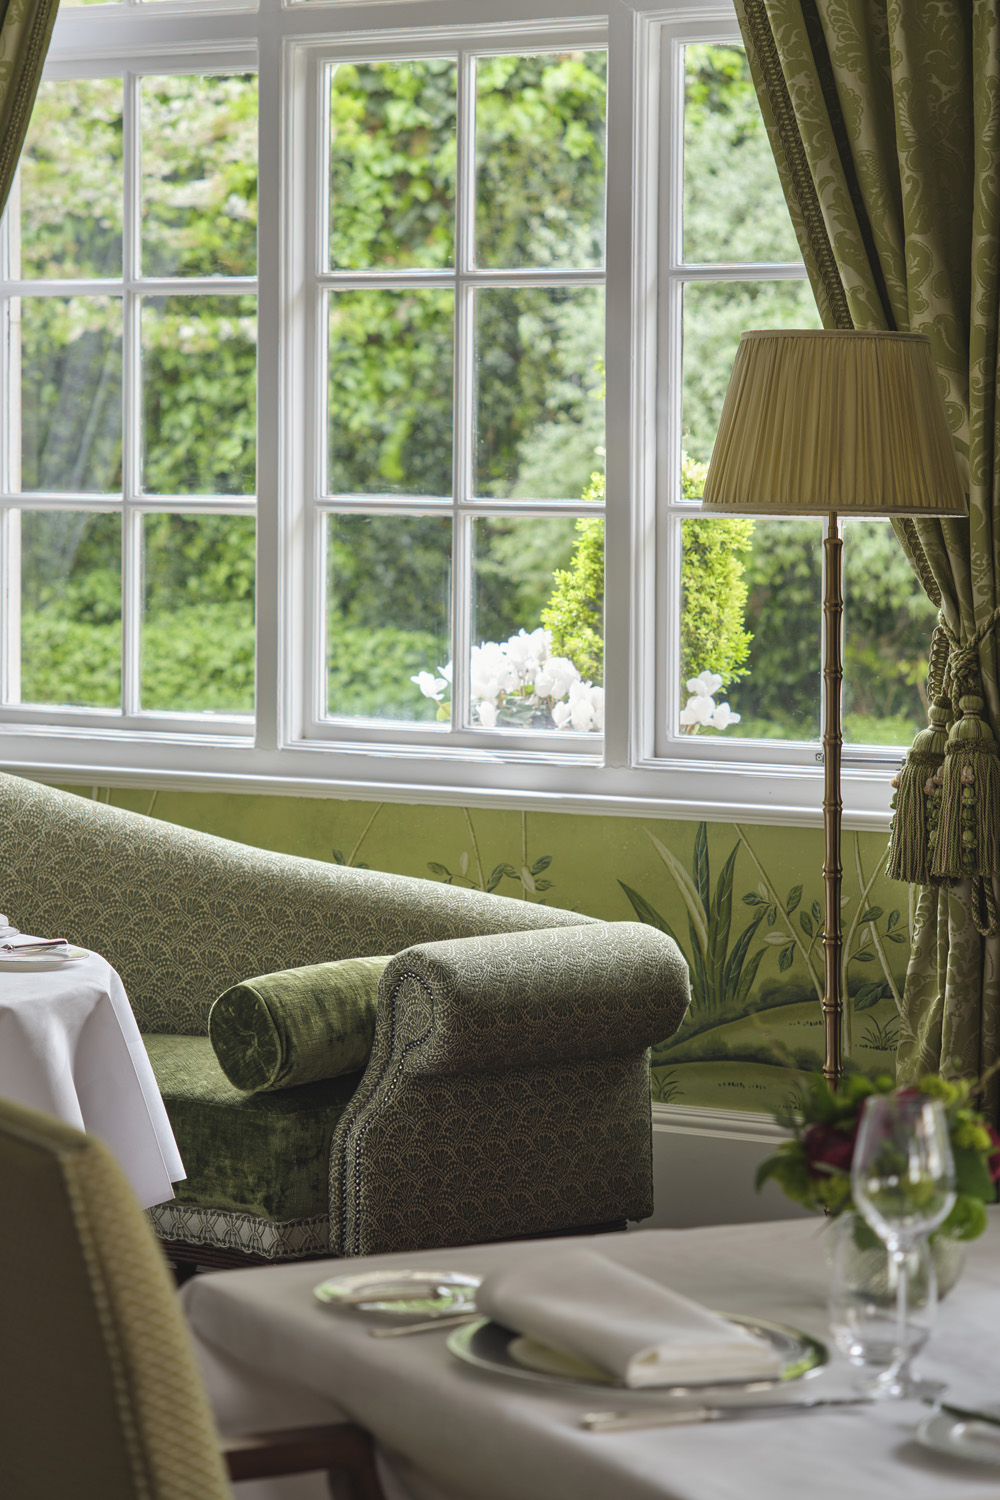 A New Lease Of Life For The Dining Room At The Goring